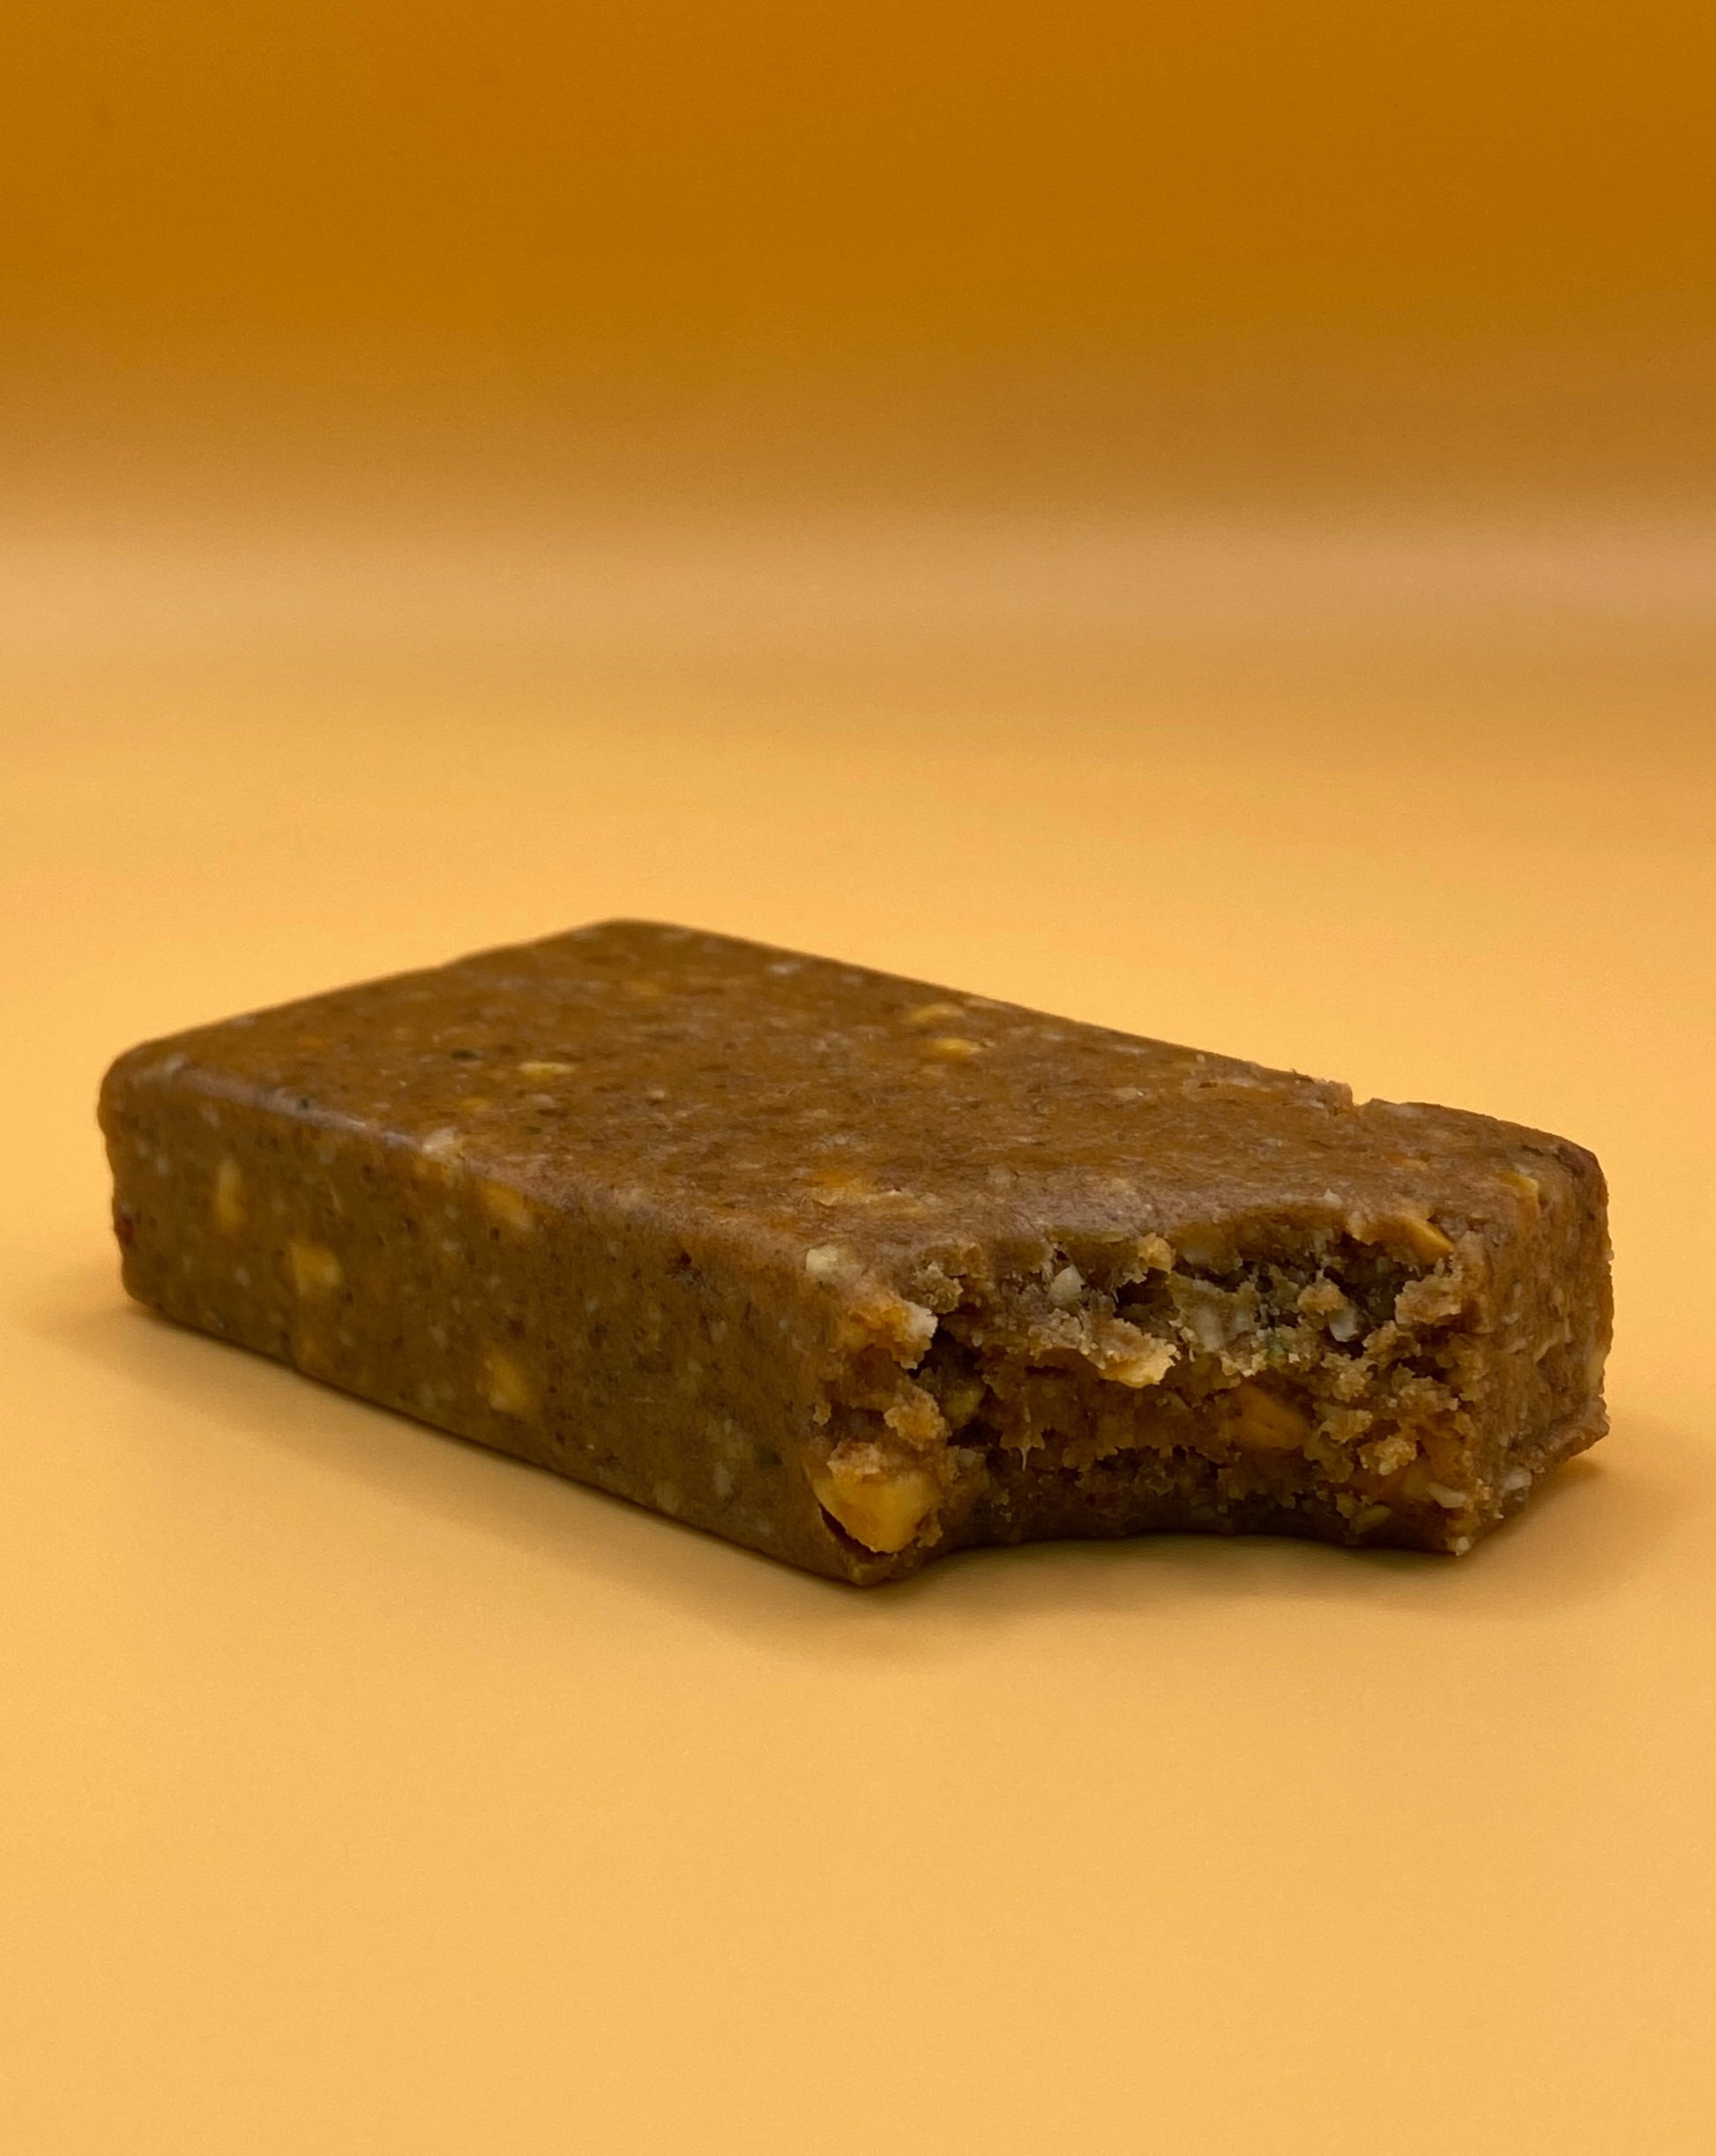 A salted peanut TIROBAR, a vegan and all natural protein bar, is shown bitten with peanuts visible in the filling. The bar is placed against an orange background.